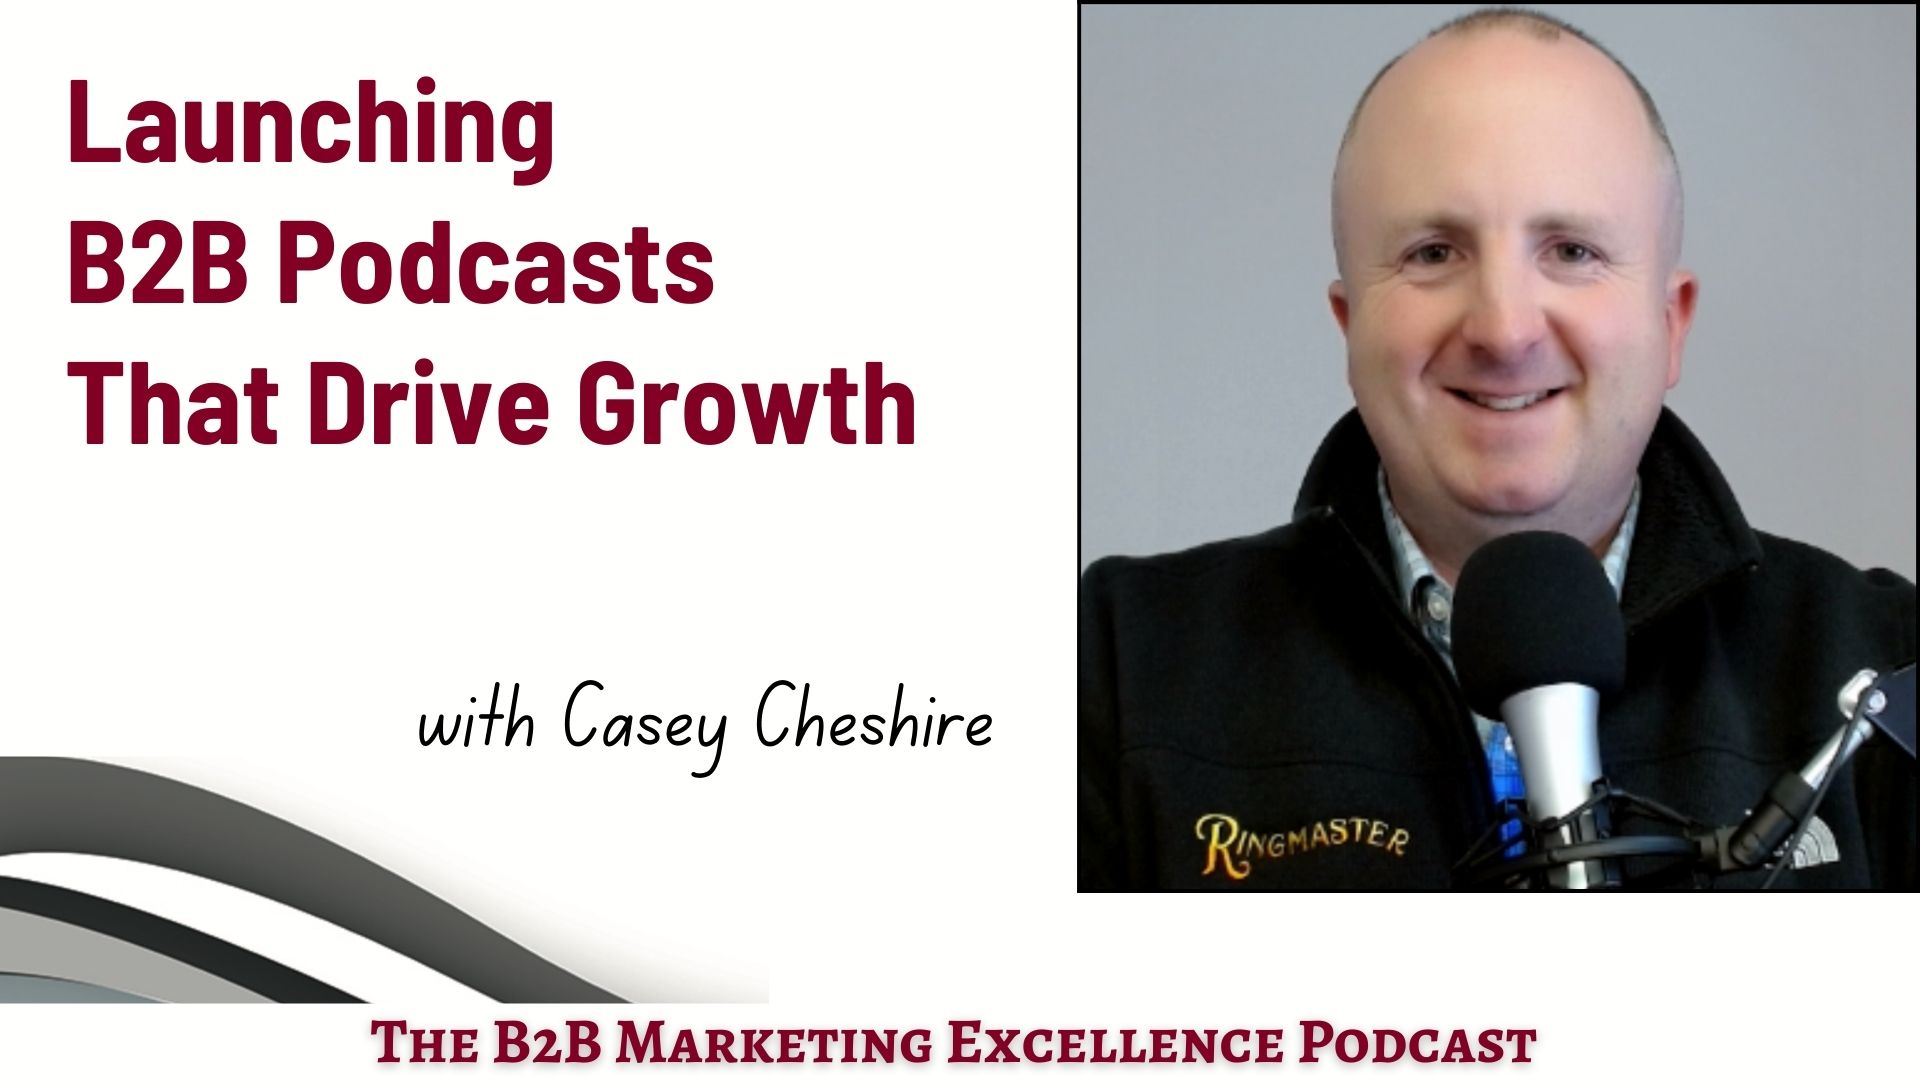 Podcast – Launching B2B Podcasts That Drive Growth